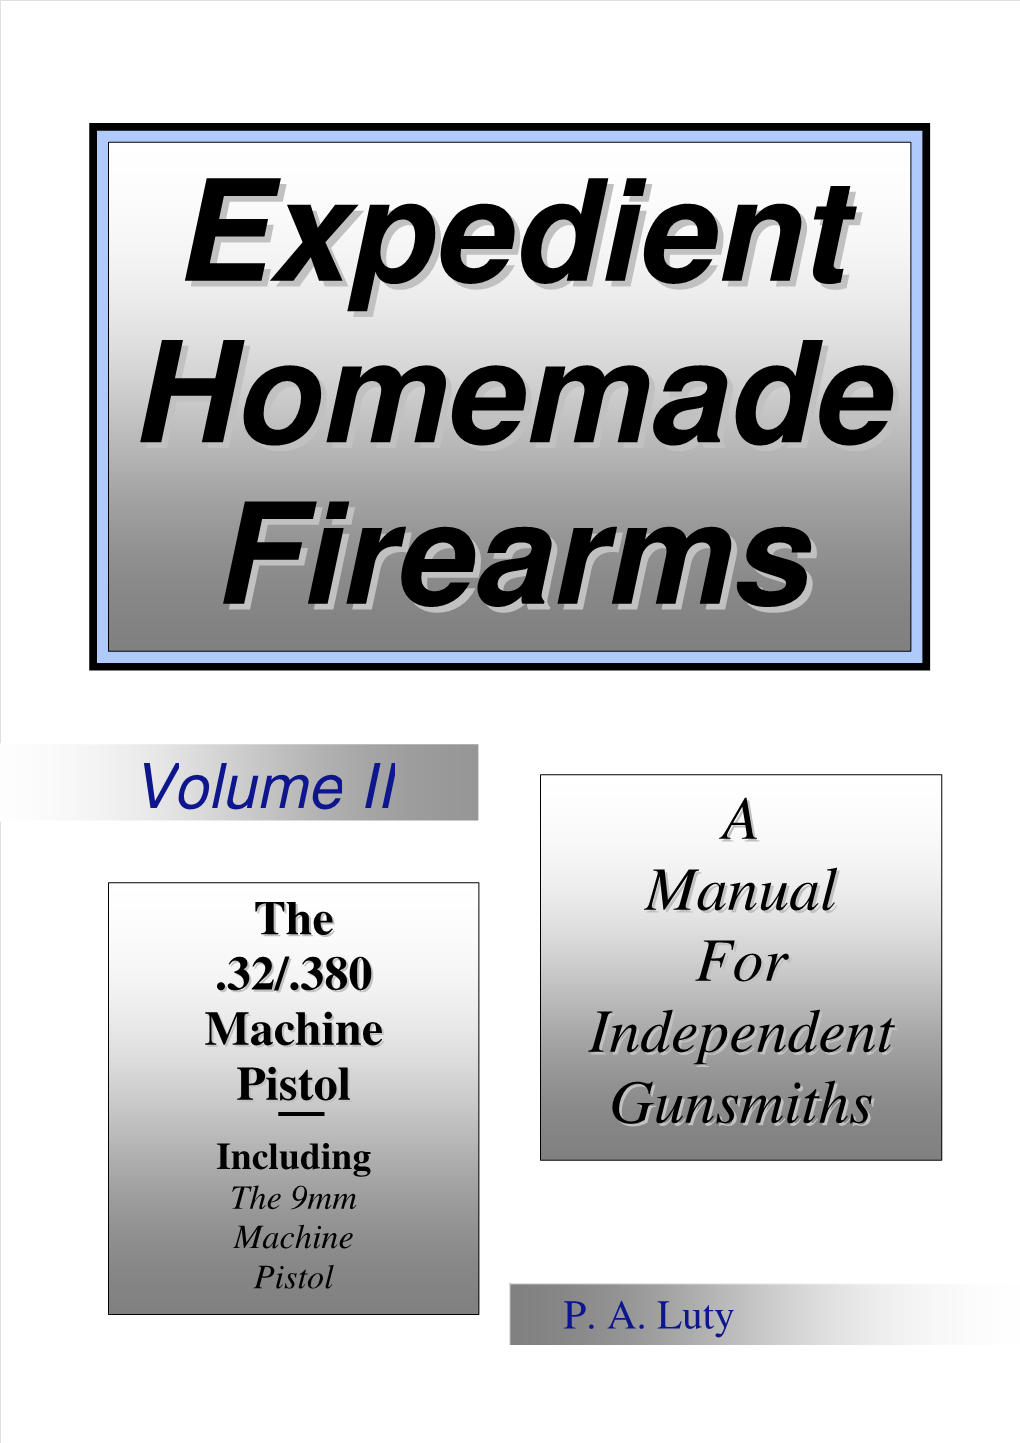 Expedient Homemade Firearms: the Machine Pistol by P